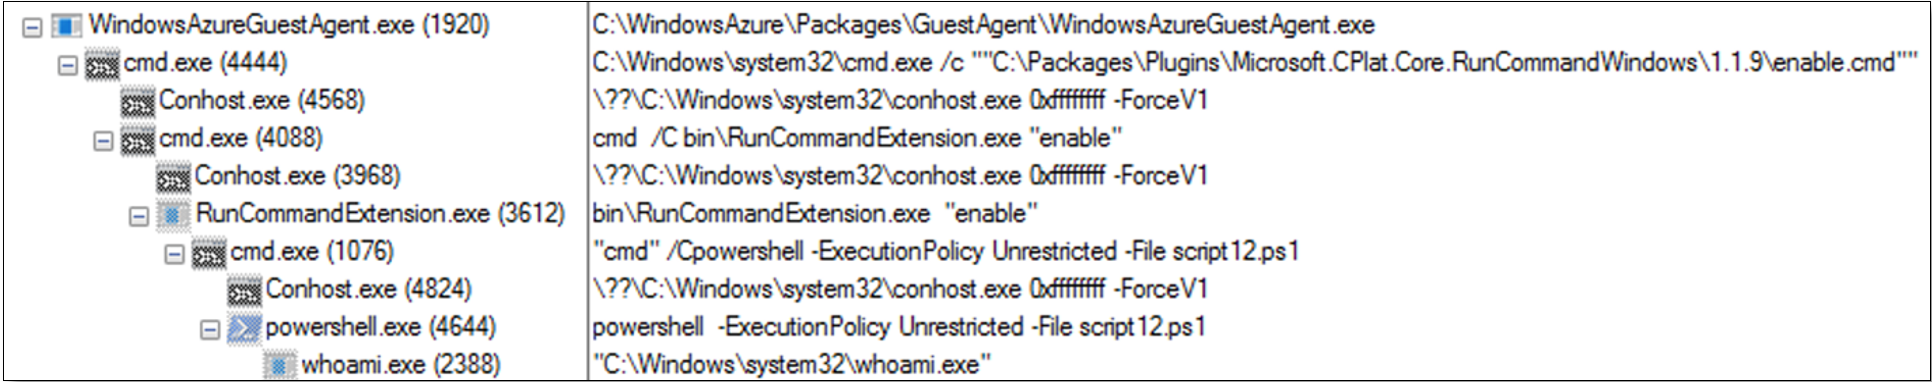 Process tree under WindowsAzureGuestAgent.exe as an execution of "whoami" is performed